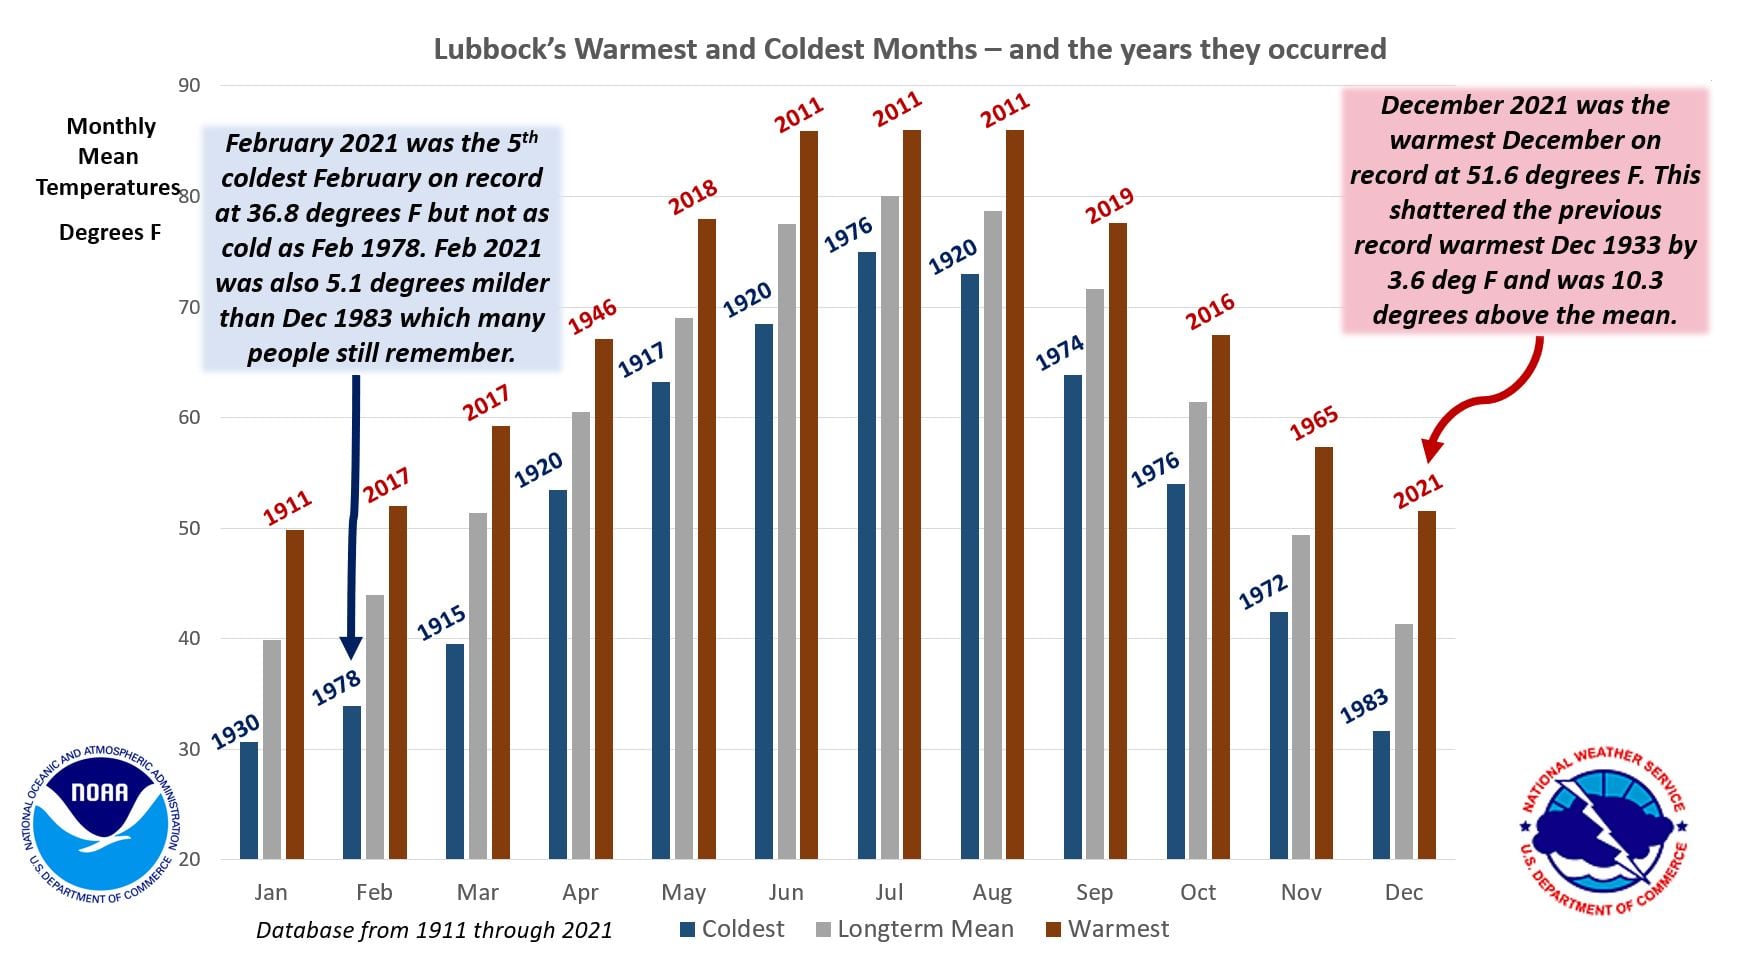 The warmest and coldest months at Lubbock